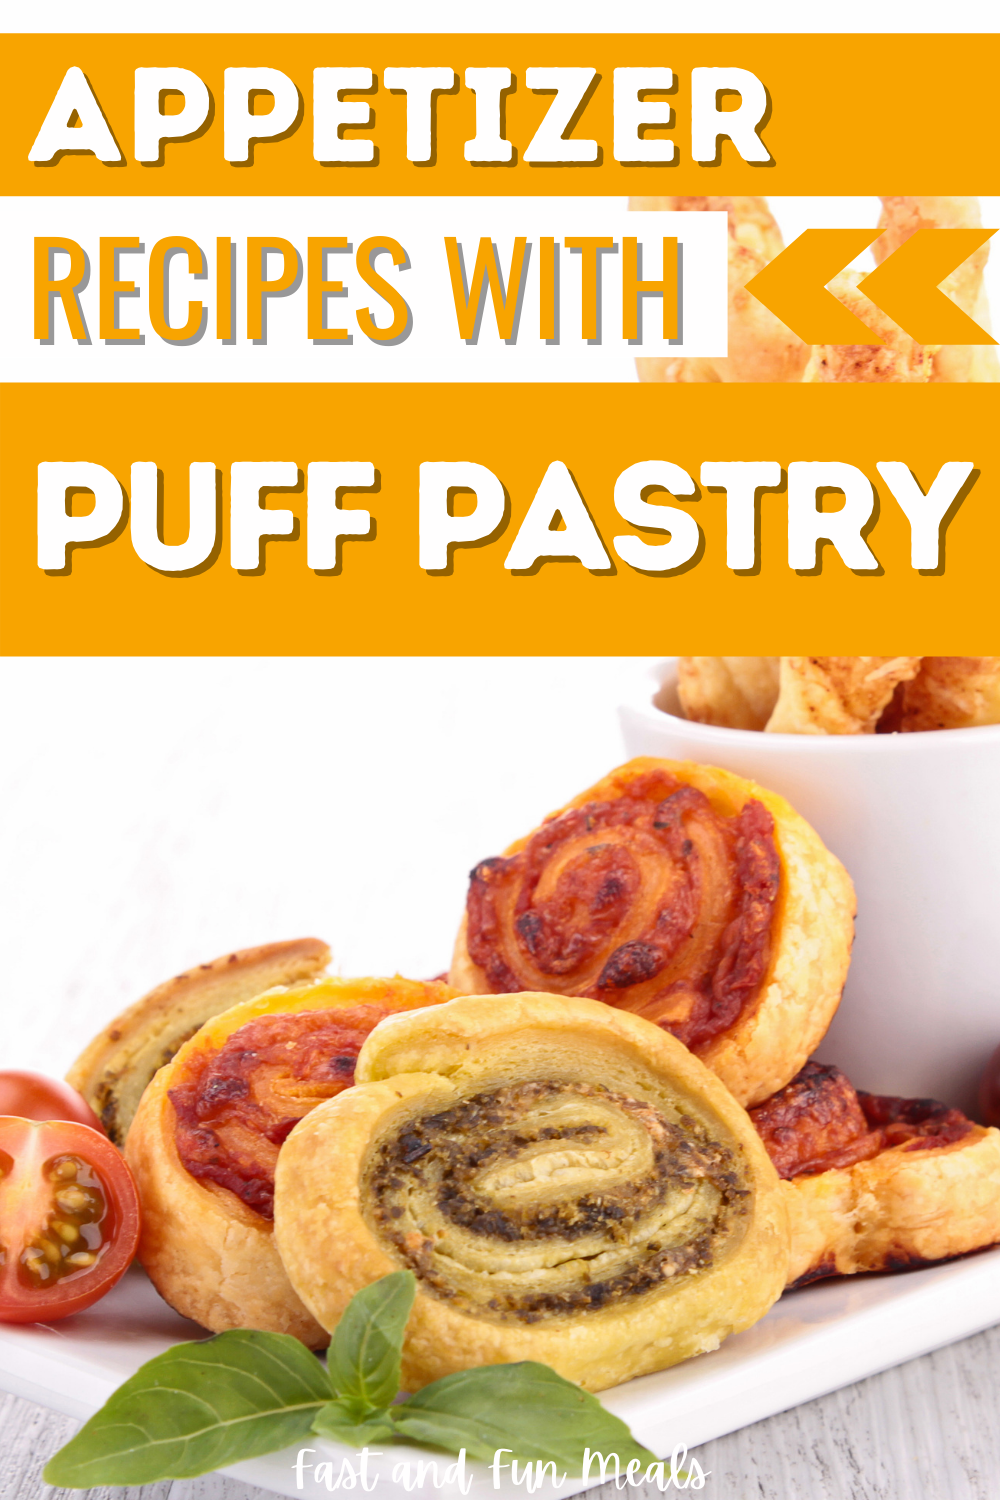 Pin showing Appetizer Recipes with Puff Pastry